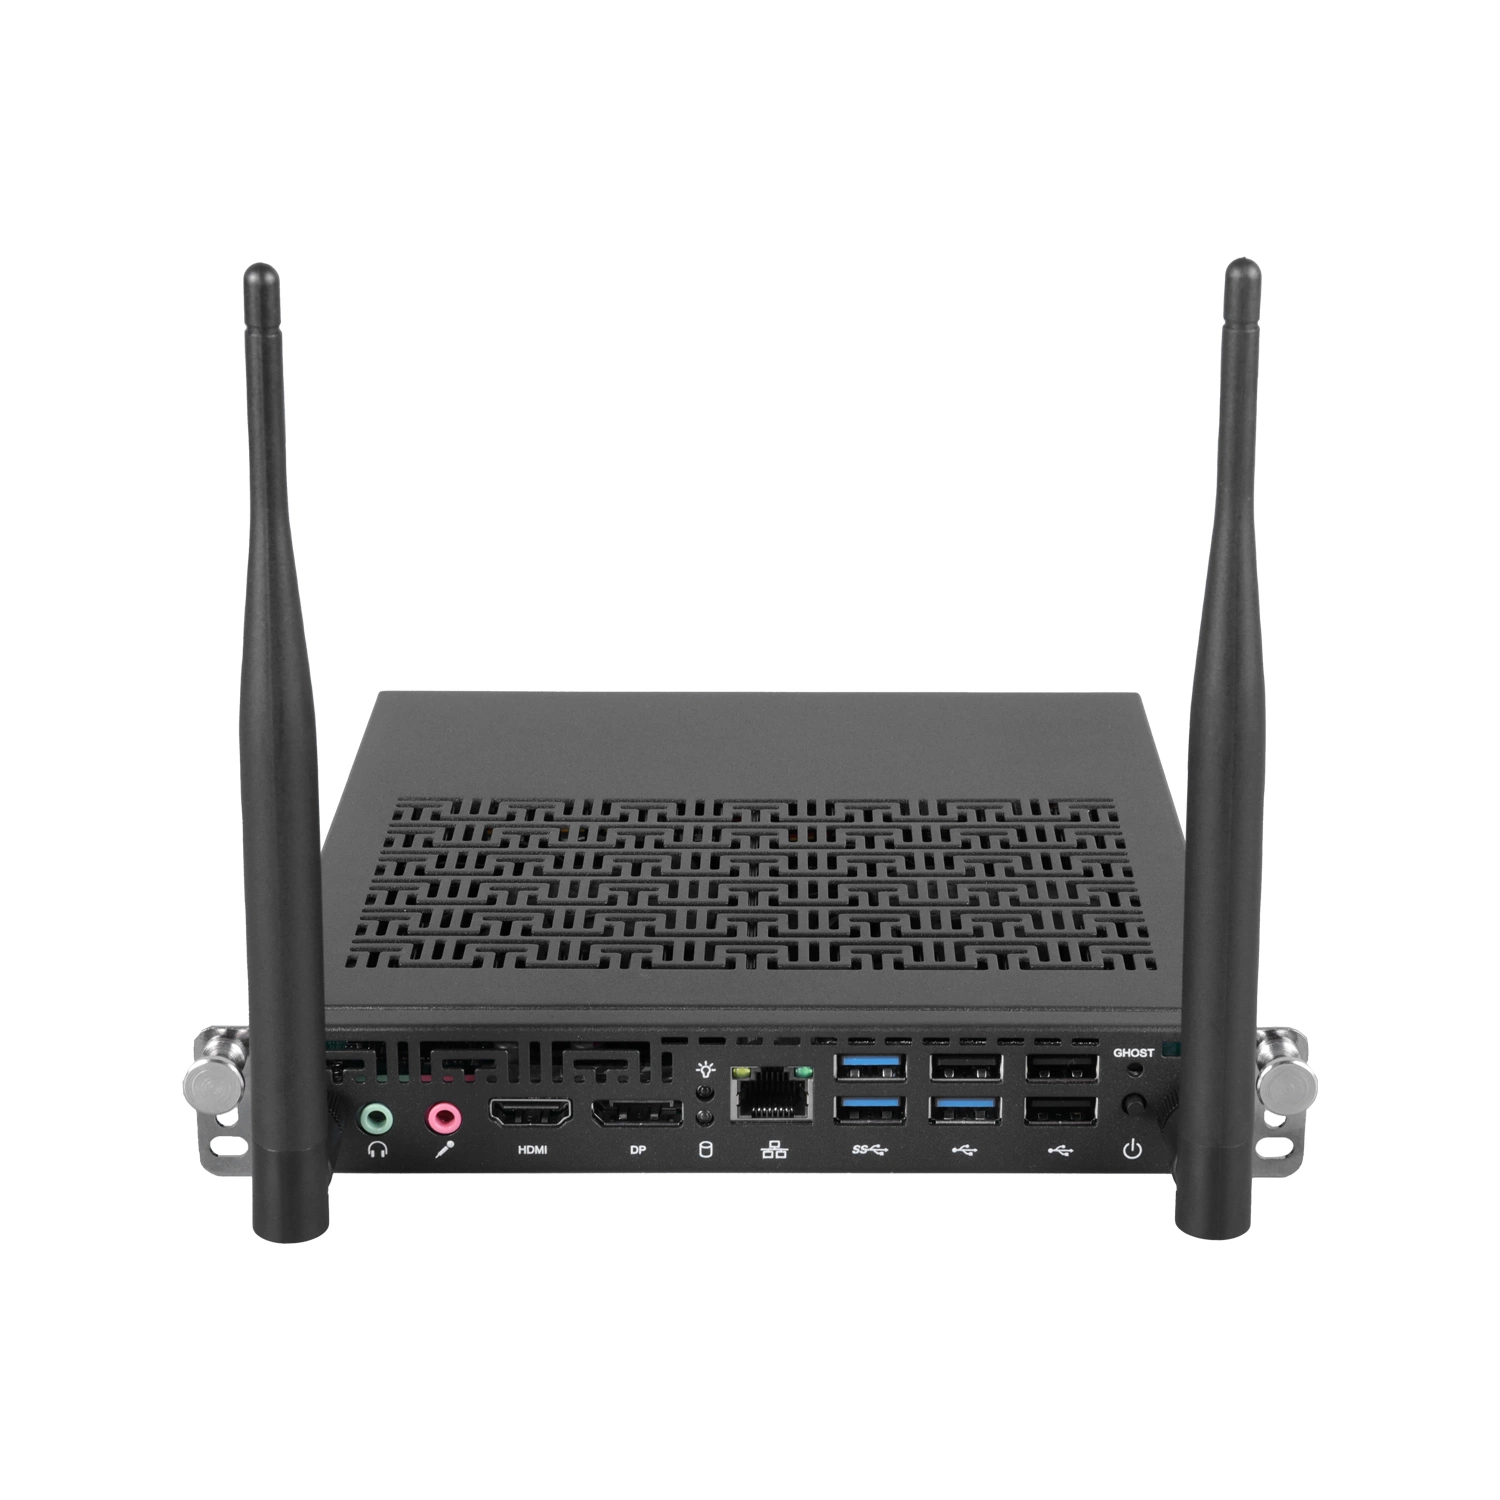 Hjs OPS I3 I5 I7 Mini PC 4K in Desktops for Whiteboard Industrial Office School Computer Easy Carry OPS